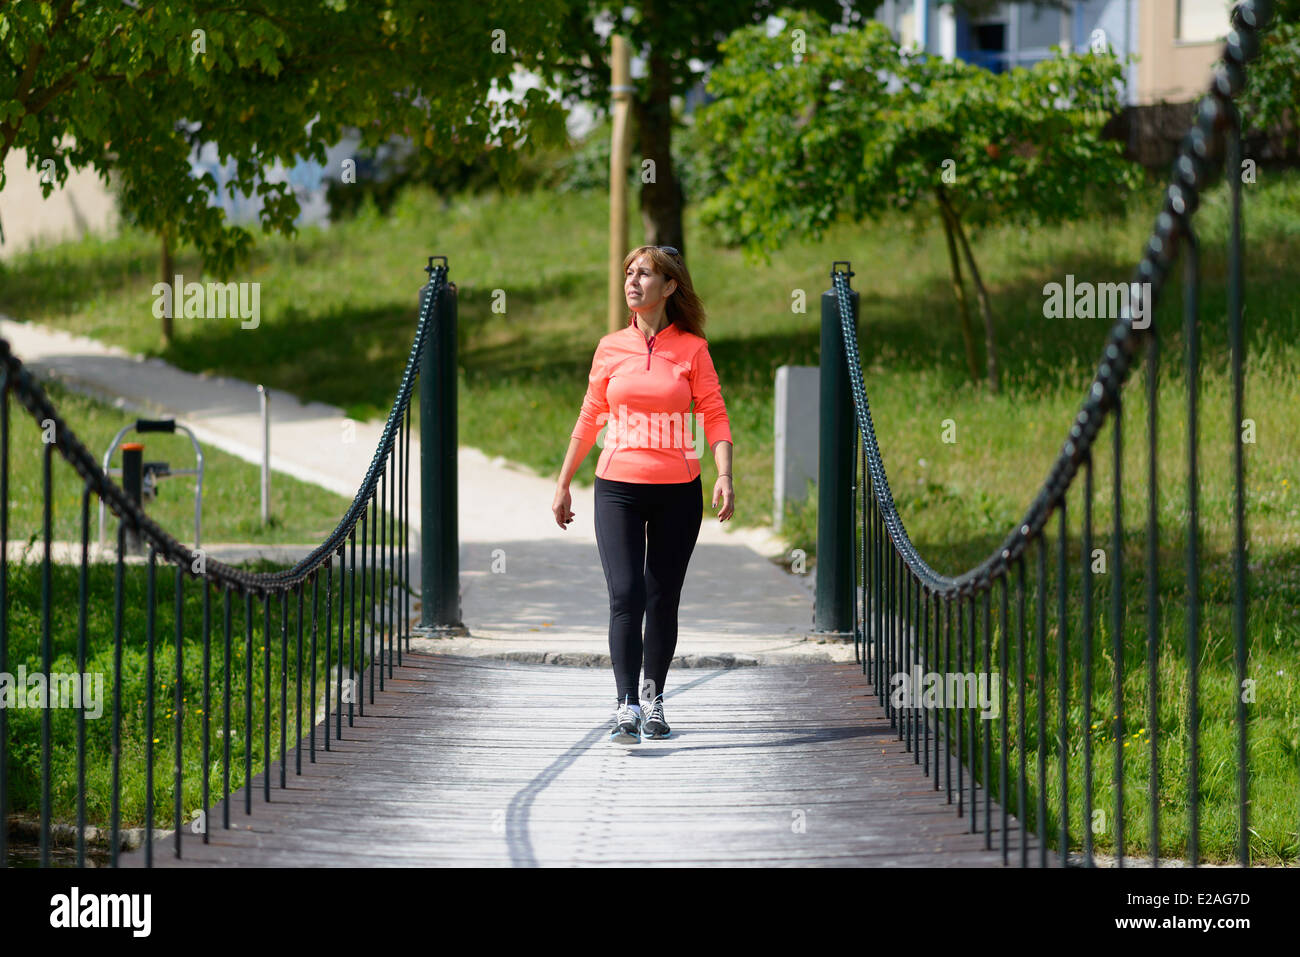 Woman power walking in a park Banque D'Images